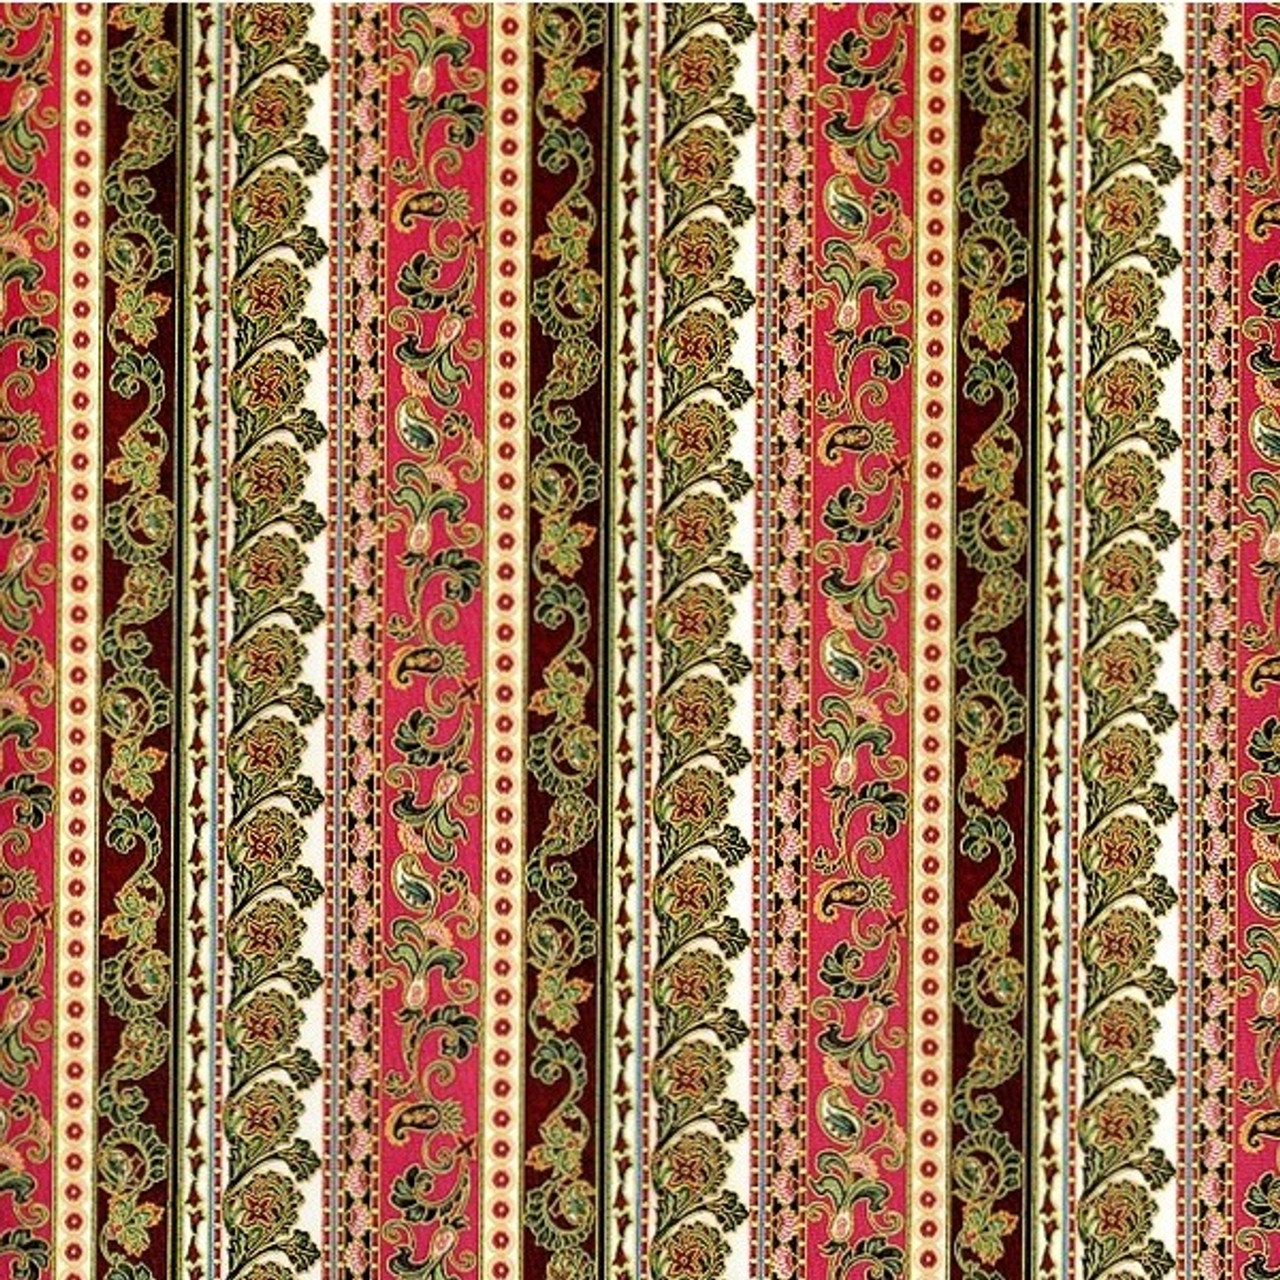 IBM897- Wallpaper - Christmas Holiday Damask for one-inch (1:12) scale miniature settings